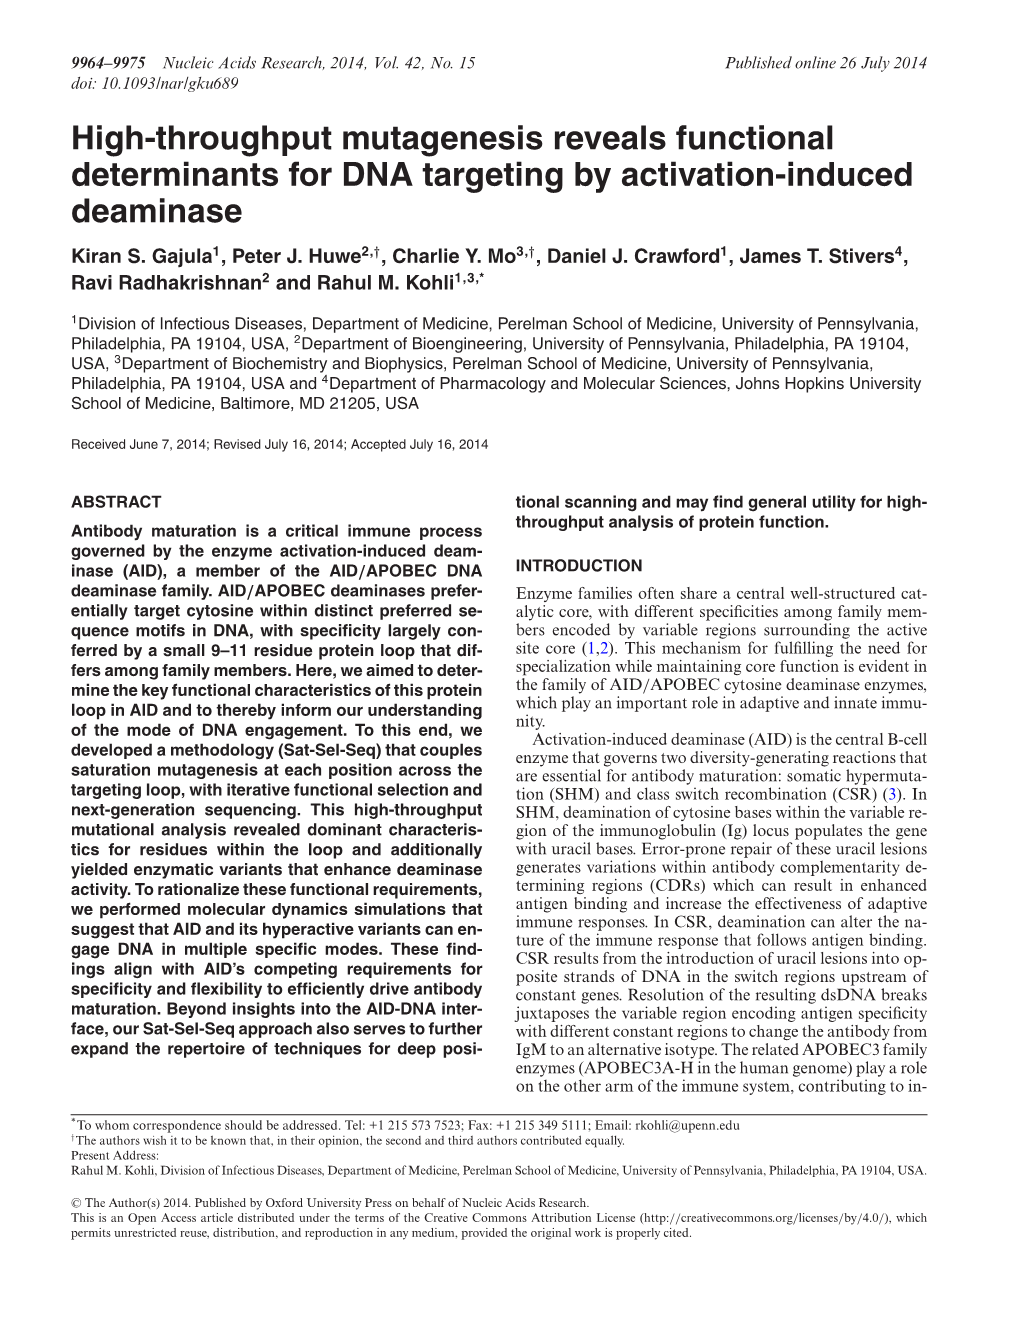 High-Throughput Mutagenesis Reveals Functional Determinants for DNA Targeting by Activation-Induced Deaminase Kiran S